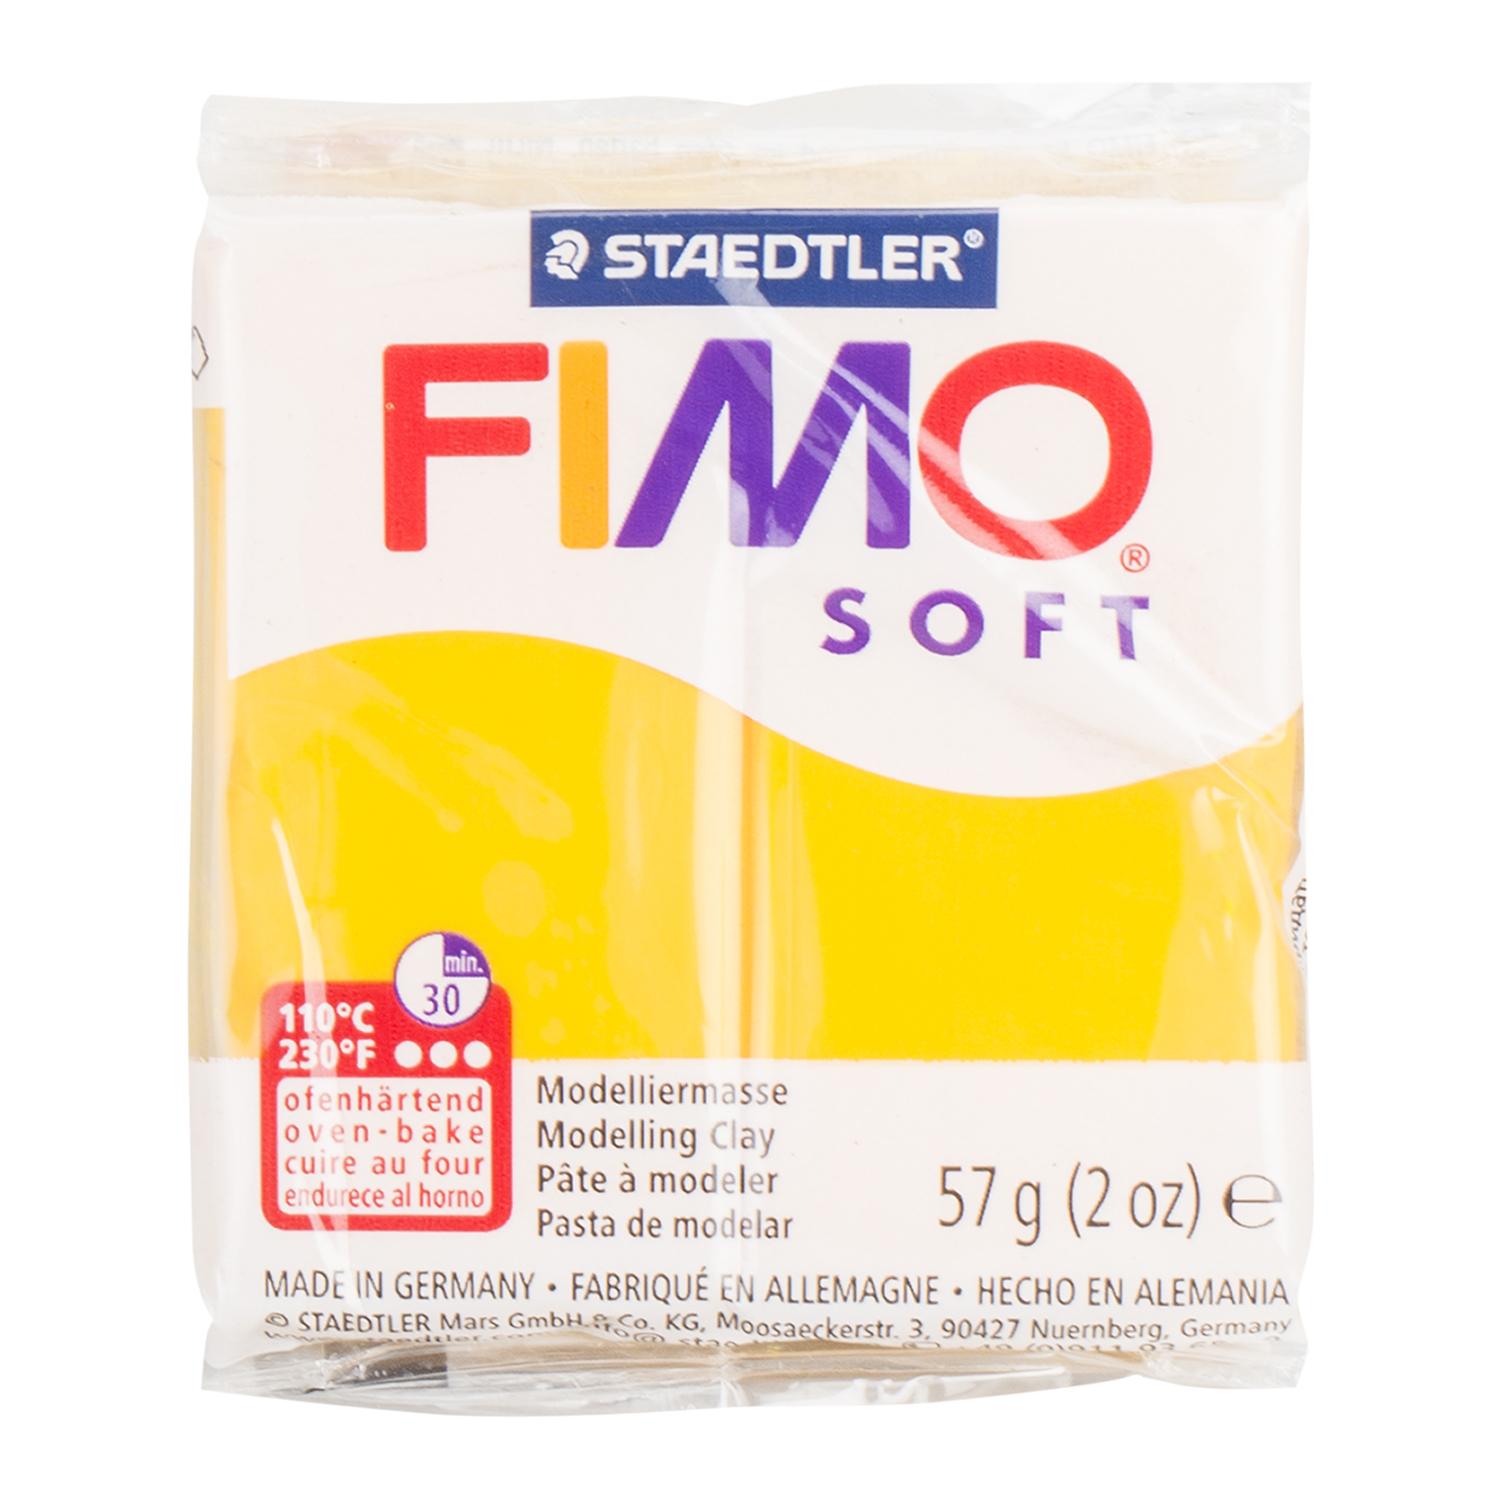 Staedtler FIMO Effect Modelling Clay Block - Metallic Red Image 3